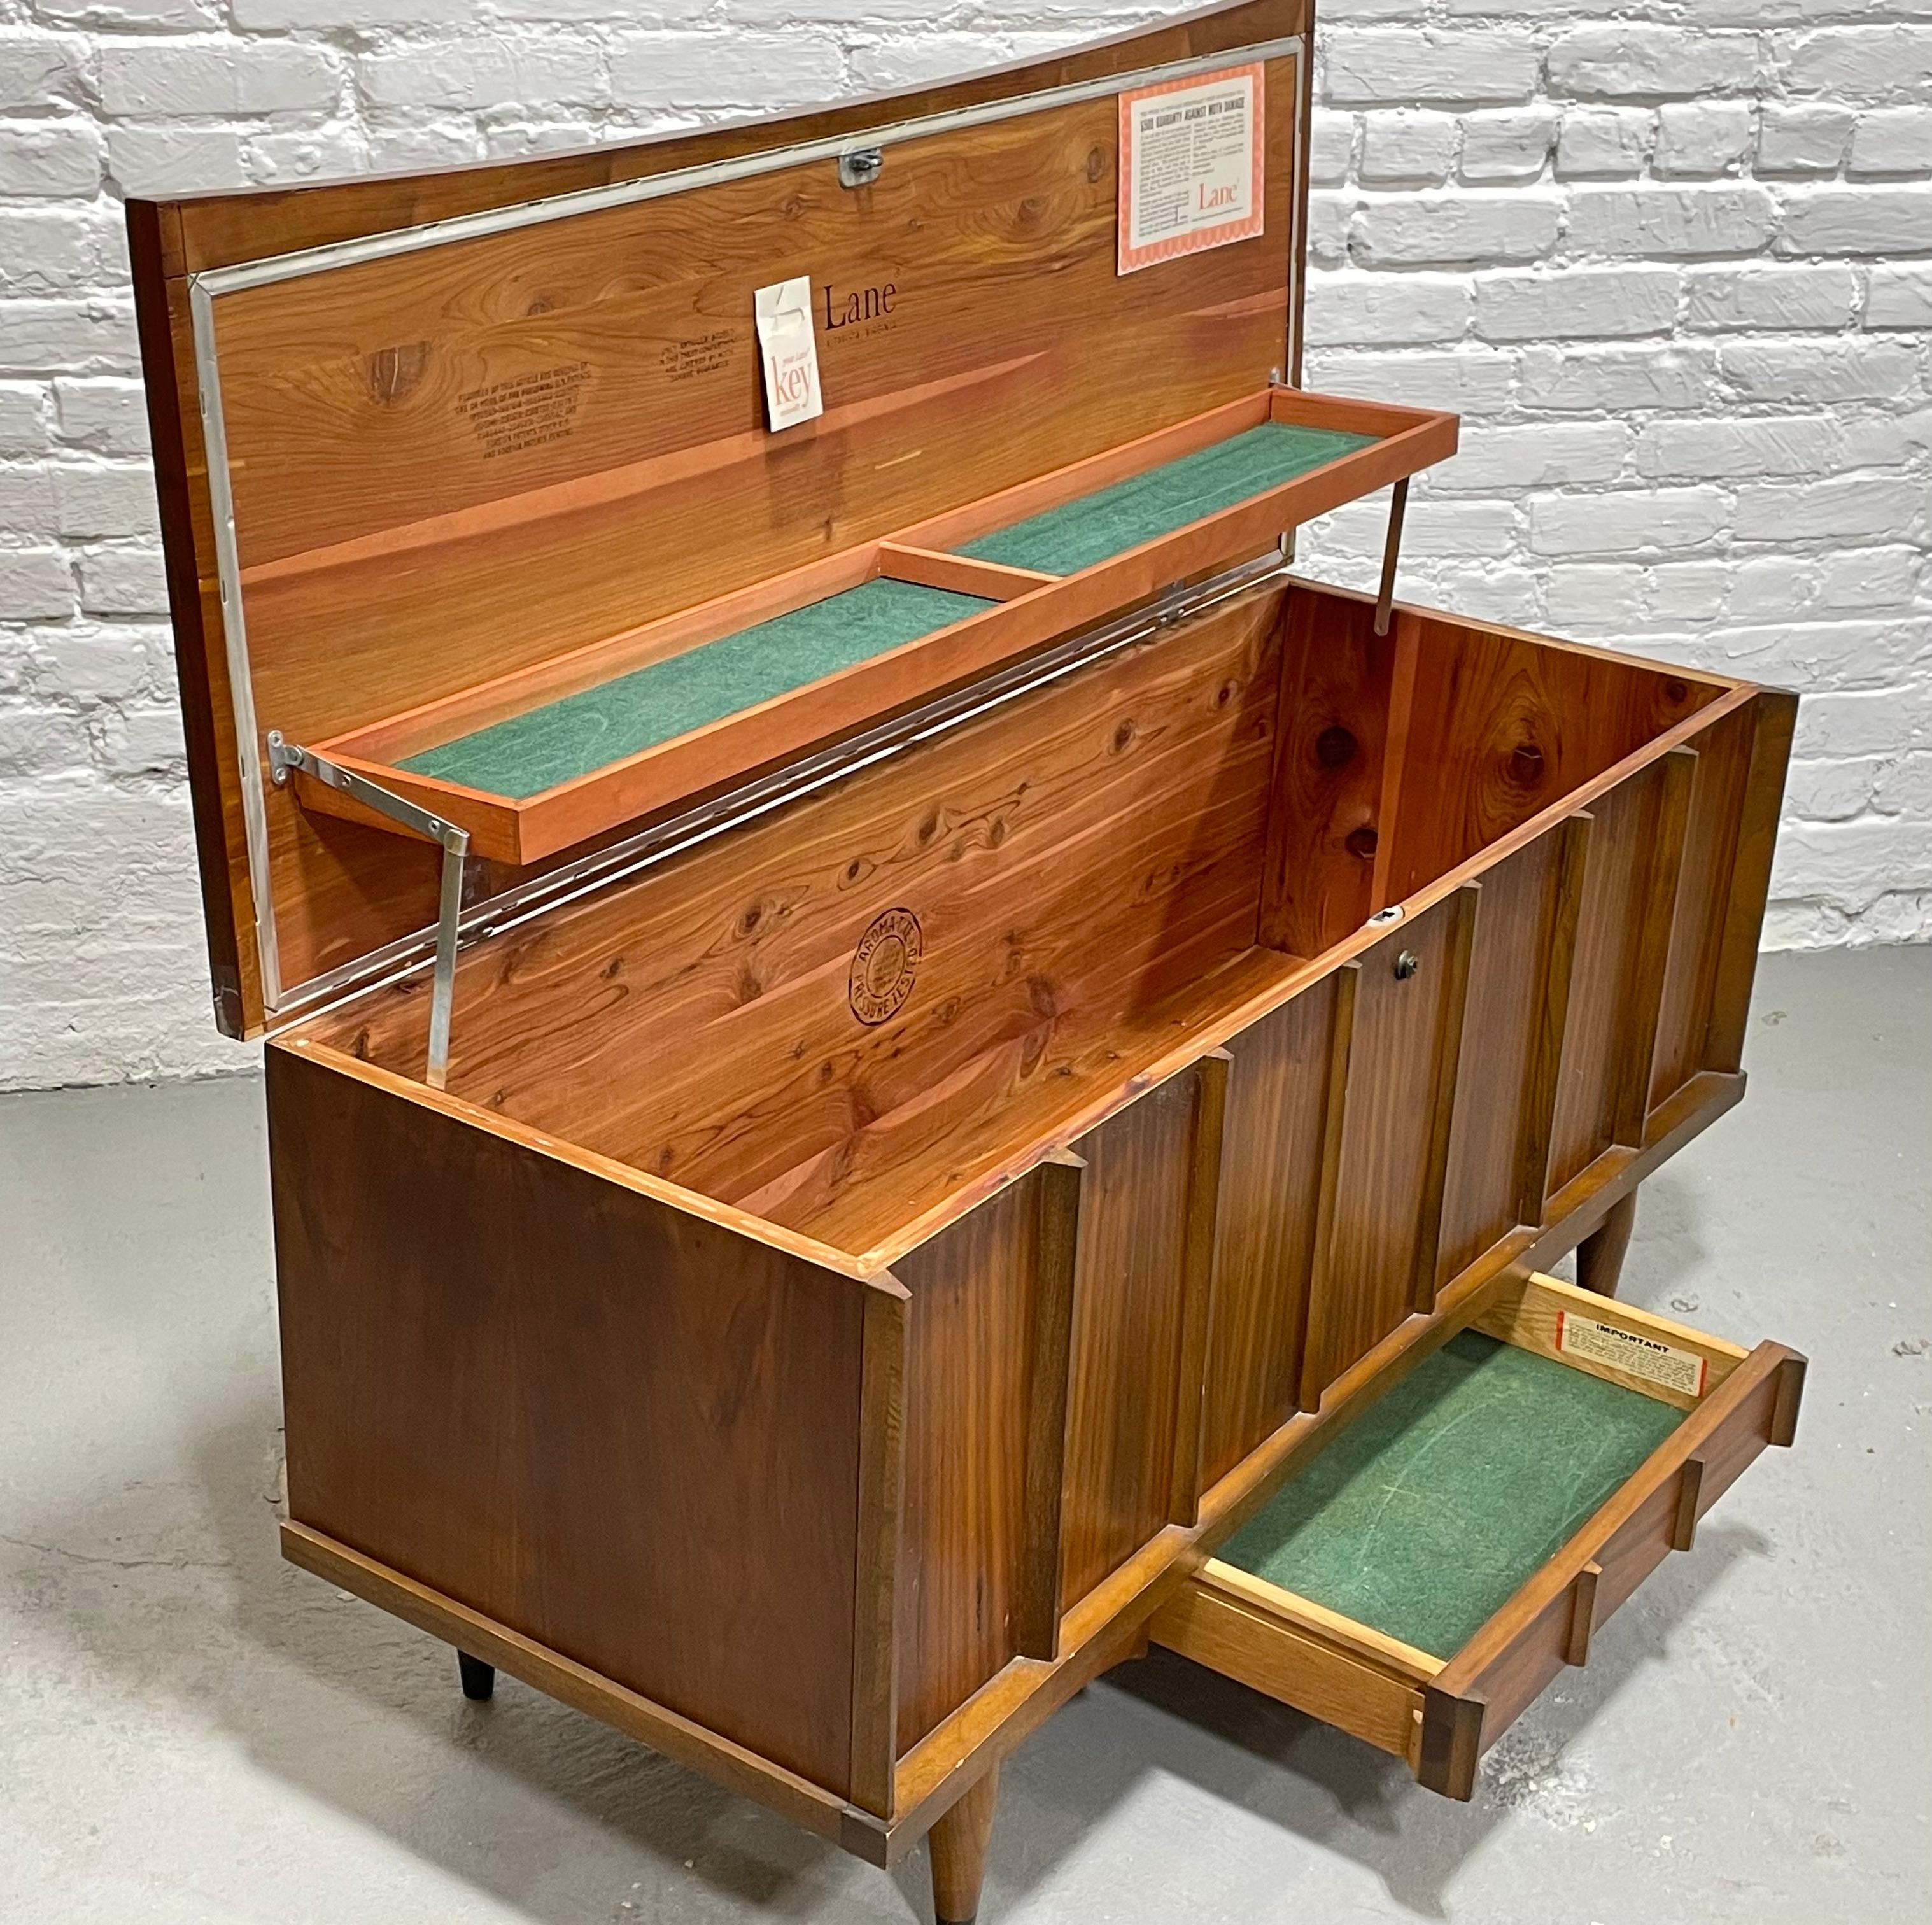 Mid-Century Modern walnut Storage Chest with hidden drawer by Lane Furniture, circa 1960s. Perfect for storing linens, blankets, off-season clothing or souvenirs. This fabulous chest makes the perfect addition to any modern interior and looks great